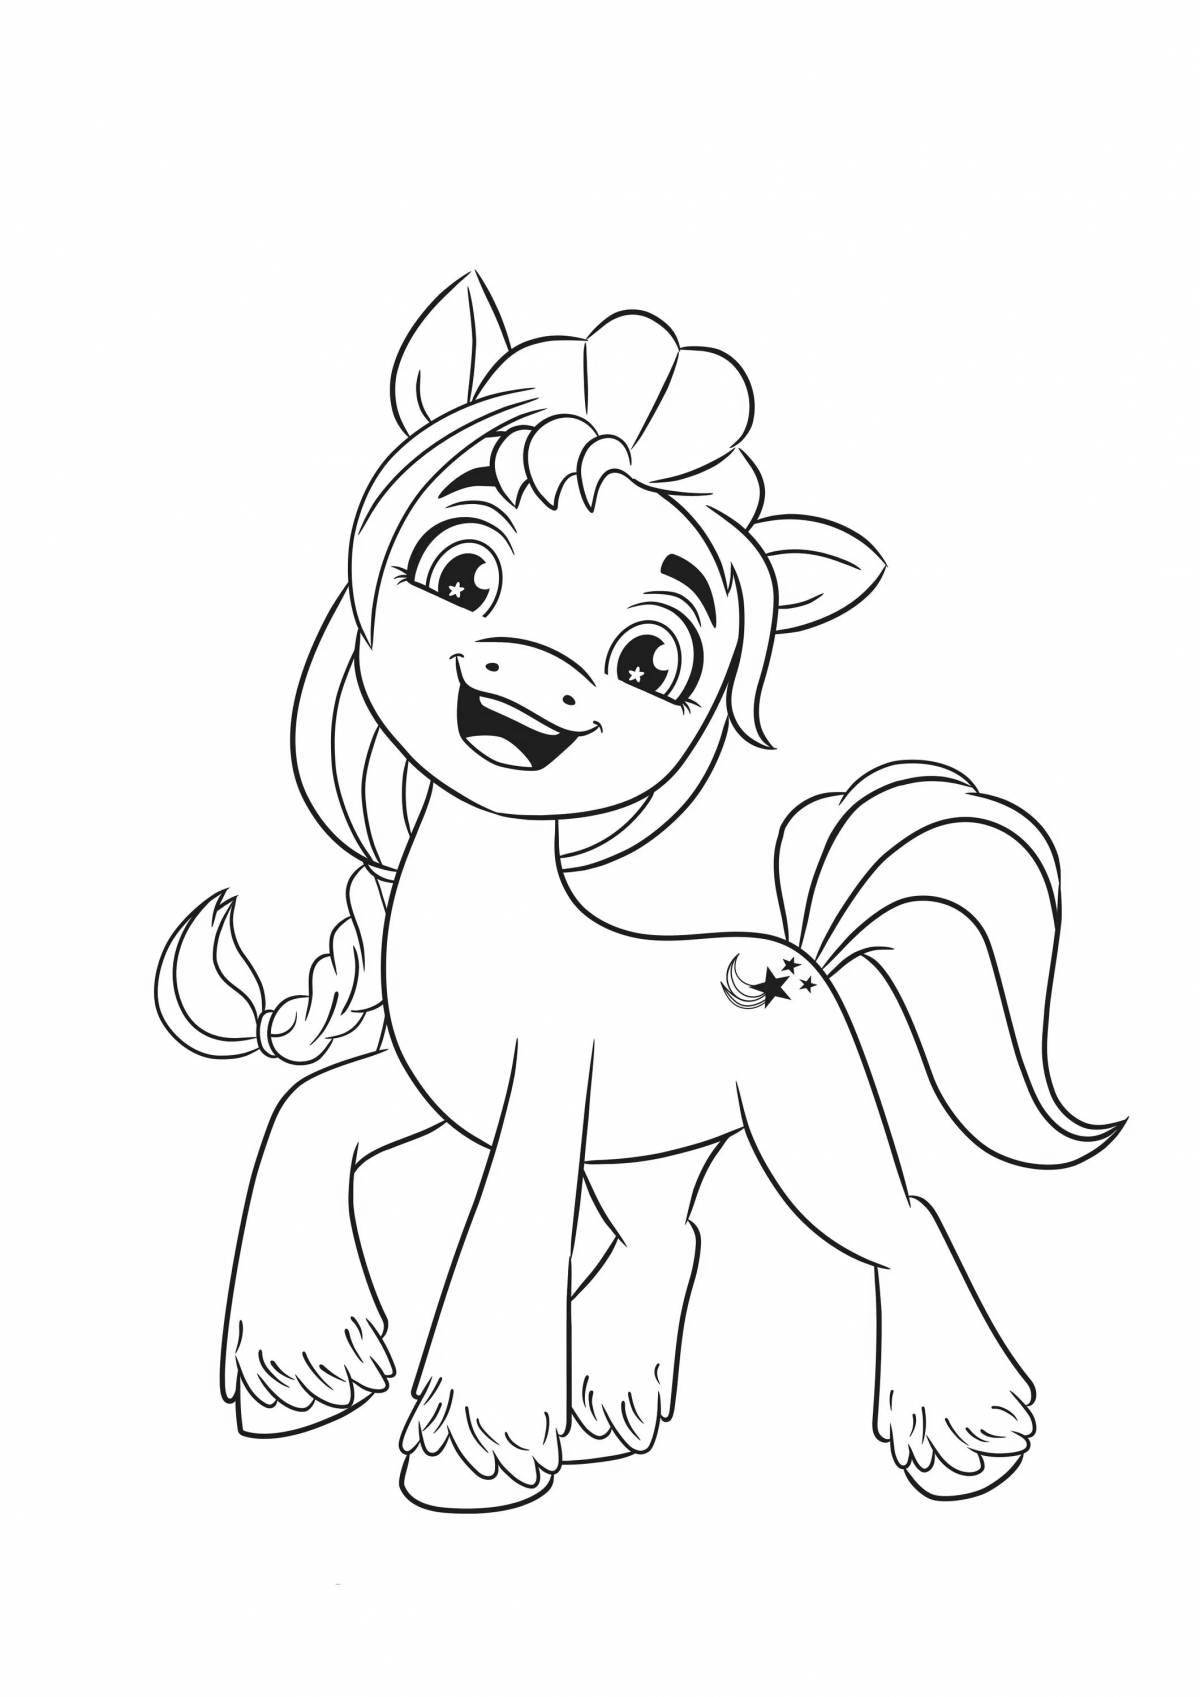 Coloring jovial little pony next generation